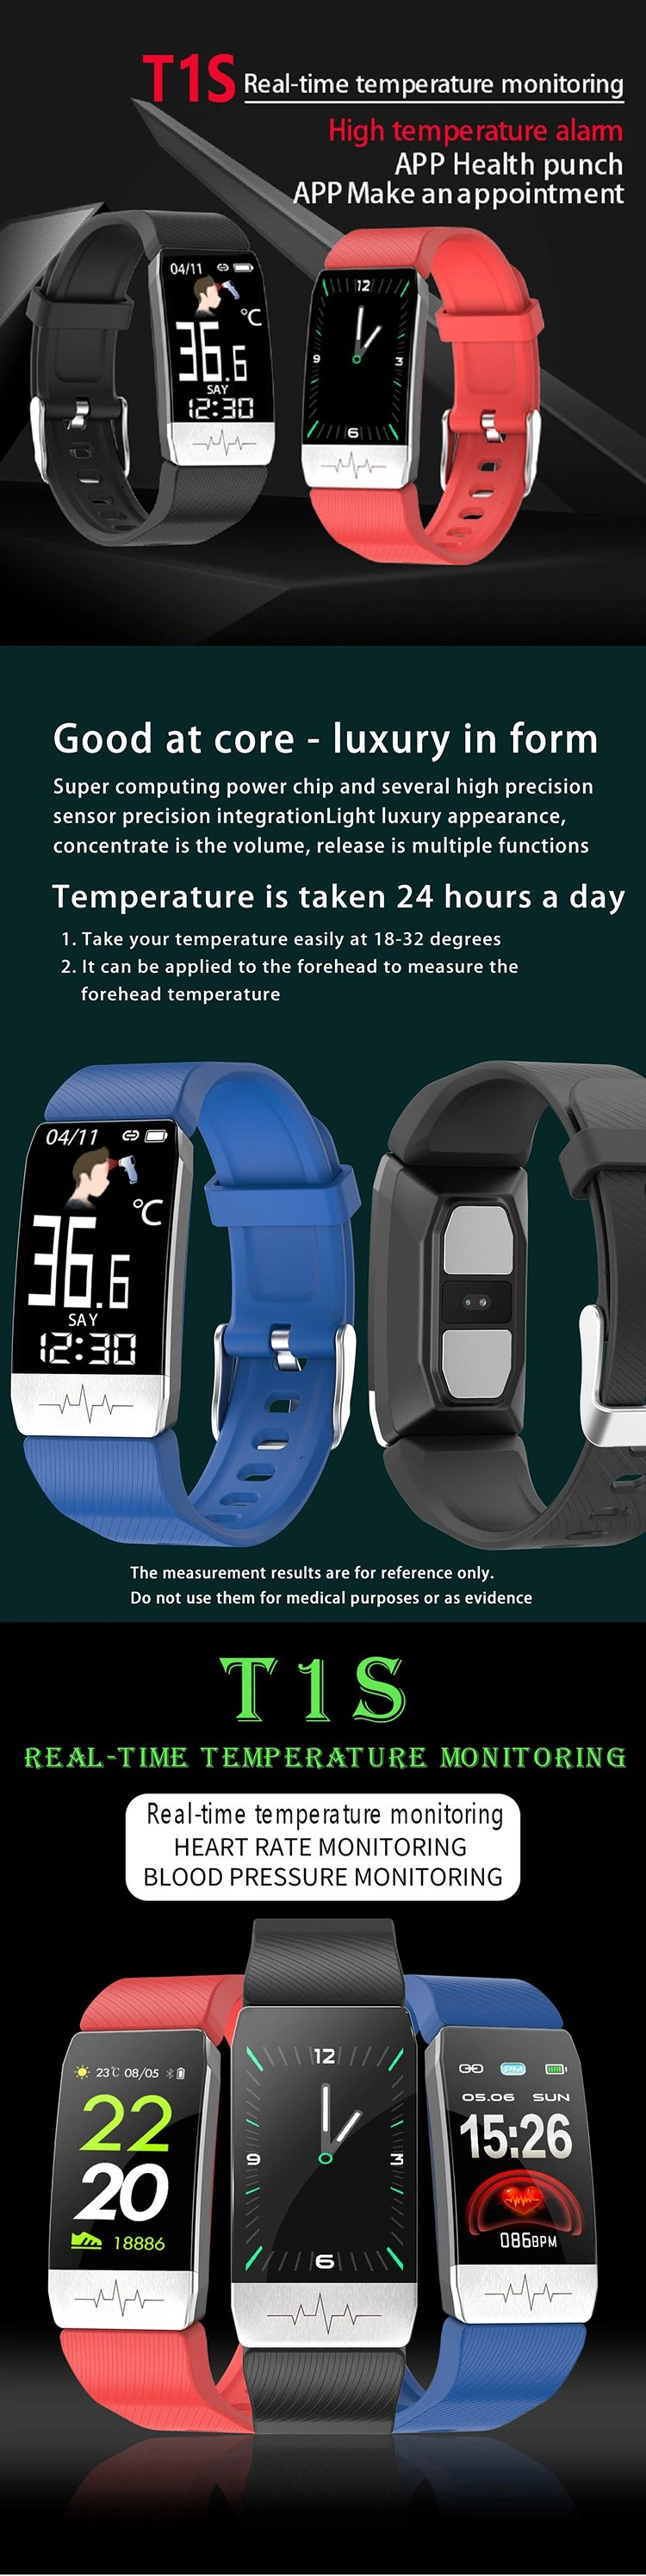 Smartband Bracelet Fitness Track Heart Rate Testing IP67 Waterproof Band Watches Health Monitoring Body Temperature Monitoring Sports Gift Watches Live